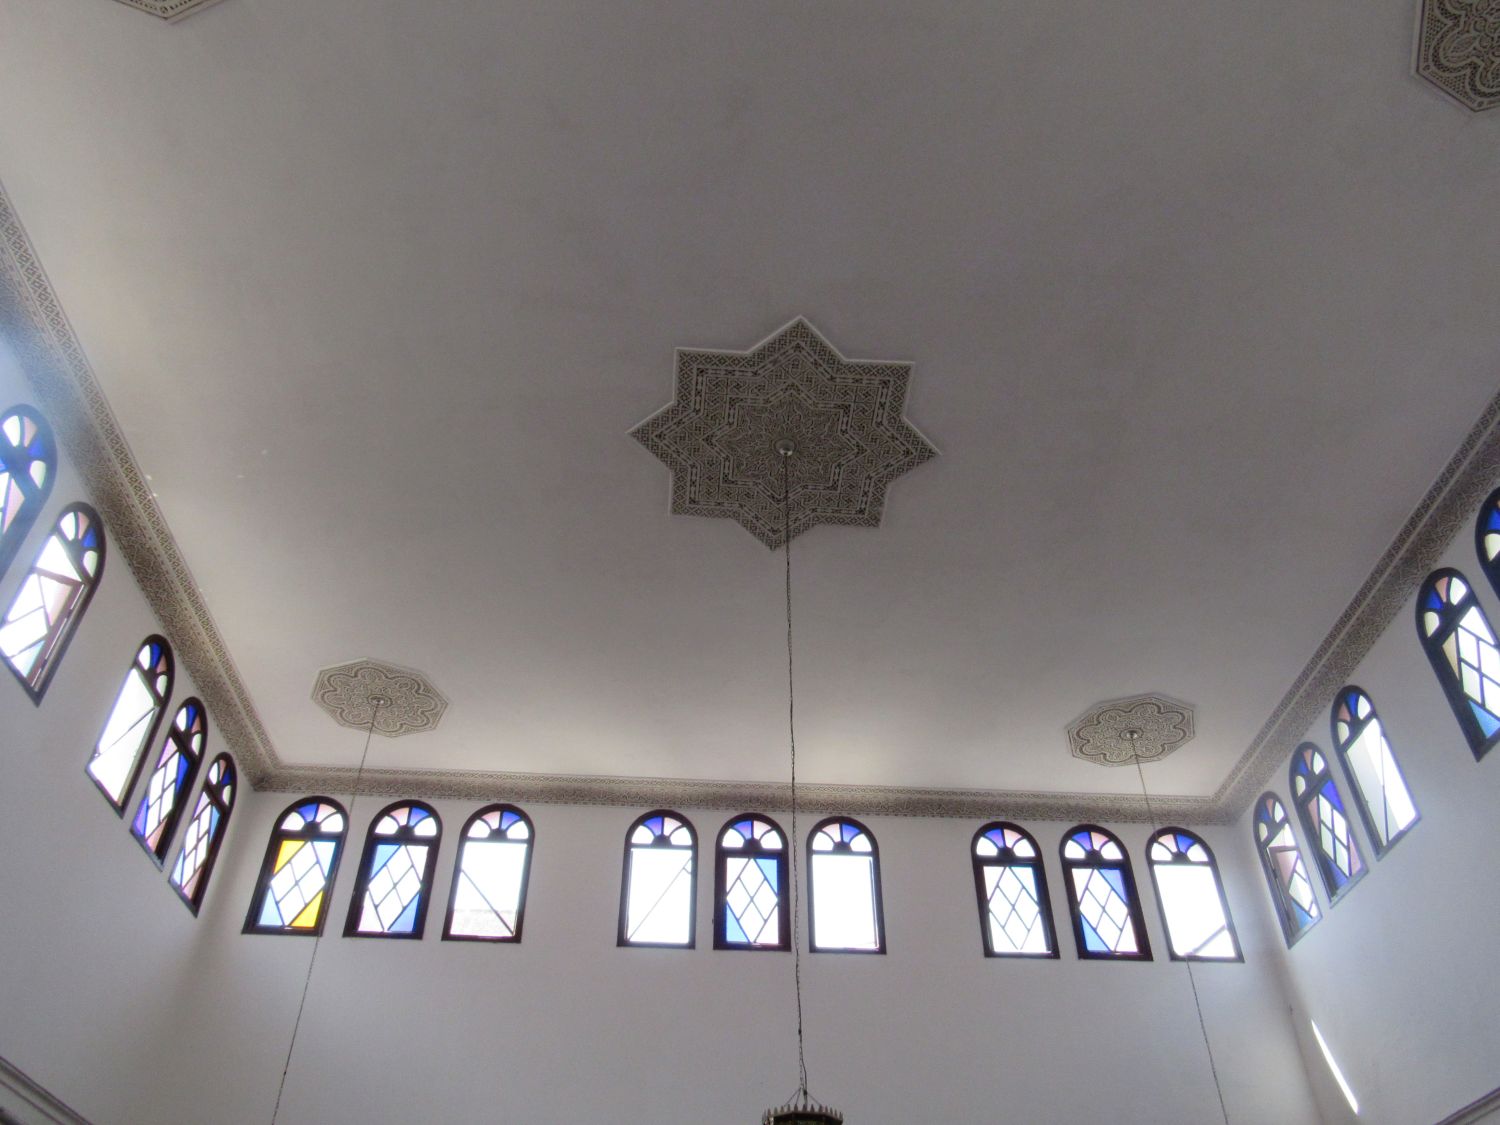 Interior view, prayer hall ceiling, chandelier suspended from eight-point star base.